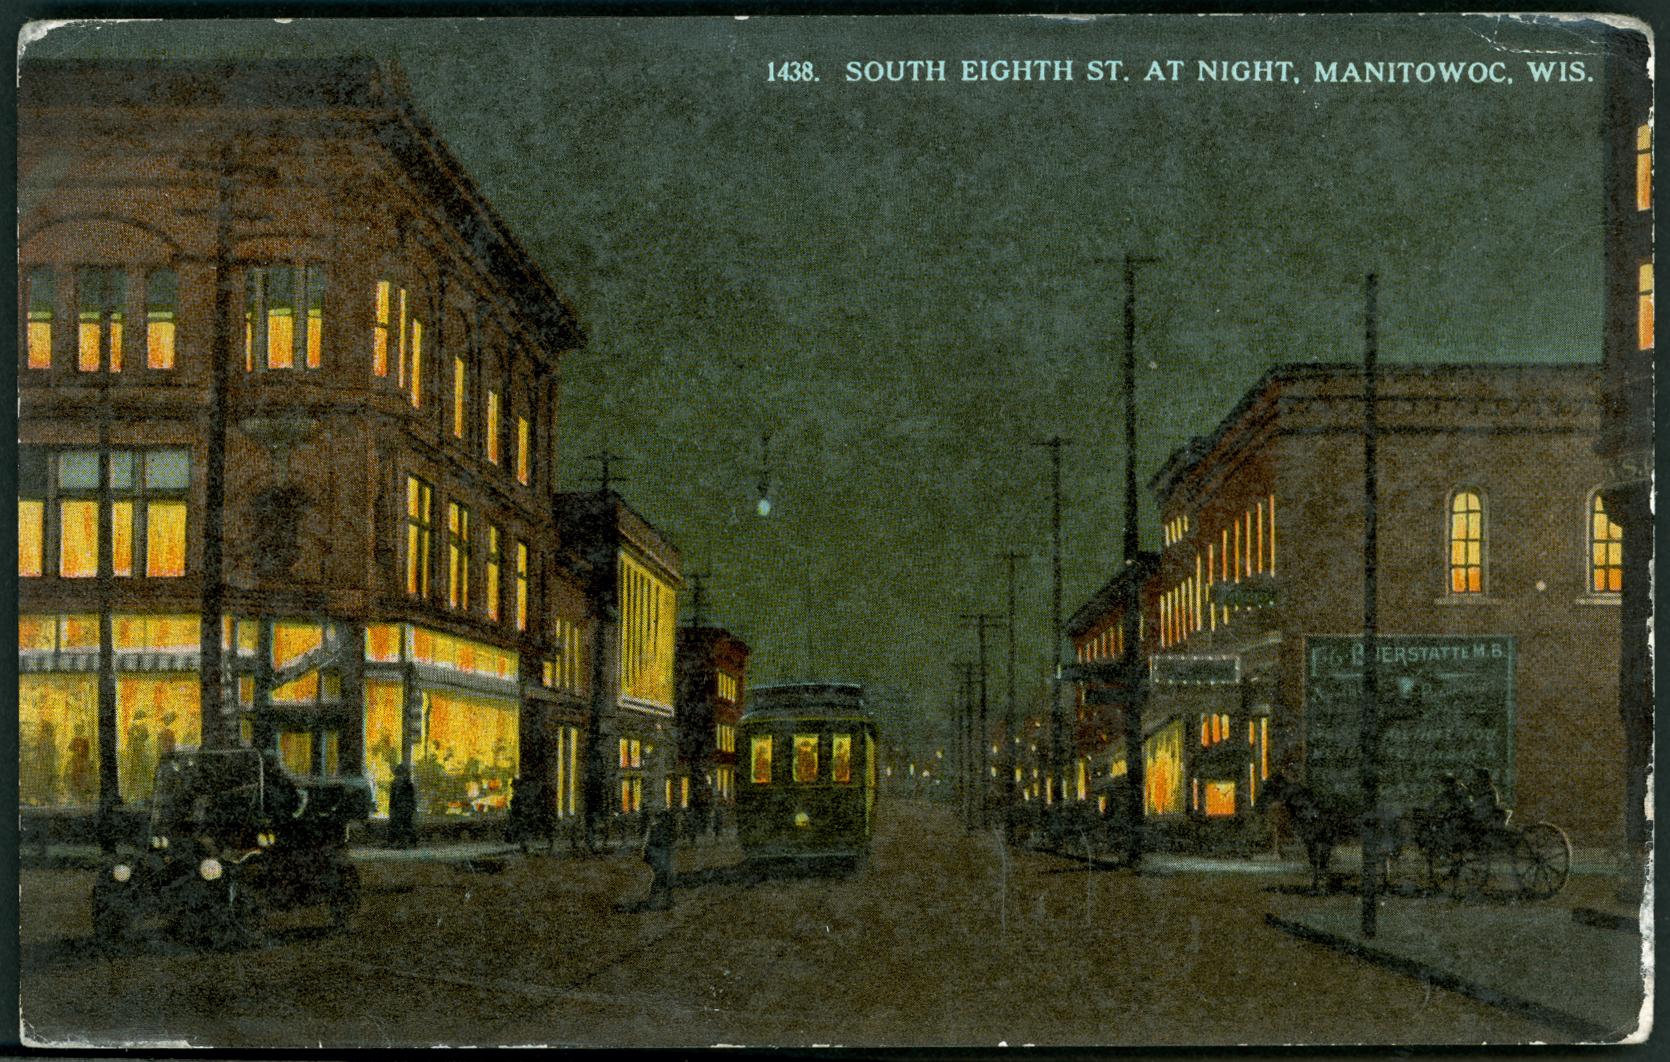 South Eighth Street at night looking to the north from just south of Jay Street. Schuette Brothers is on the left and Buerstatte drugstore on the right. ca. 1921-1927.